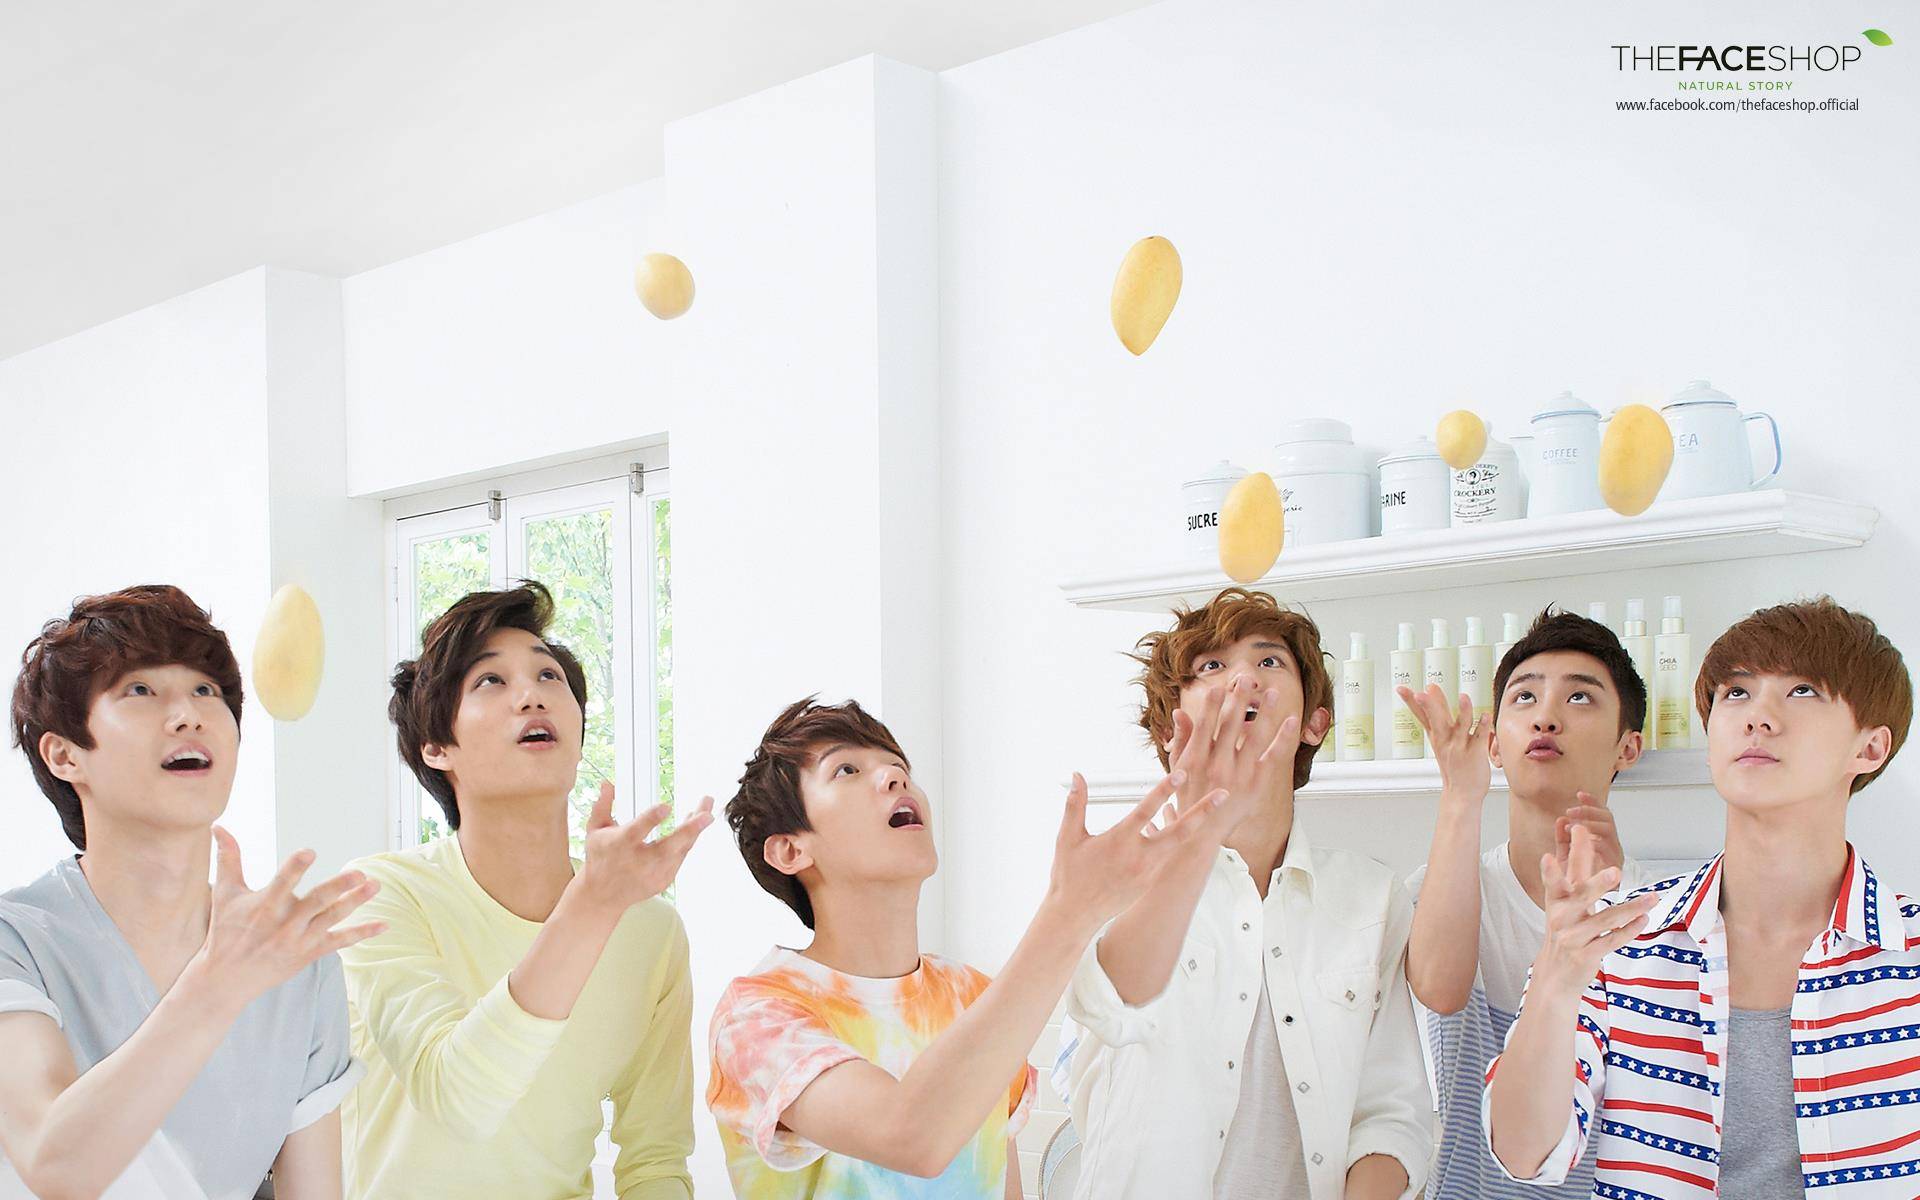 EXO K For The Face Shop